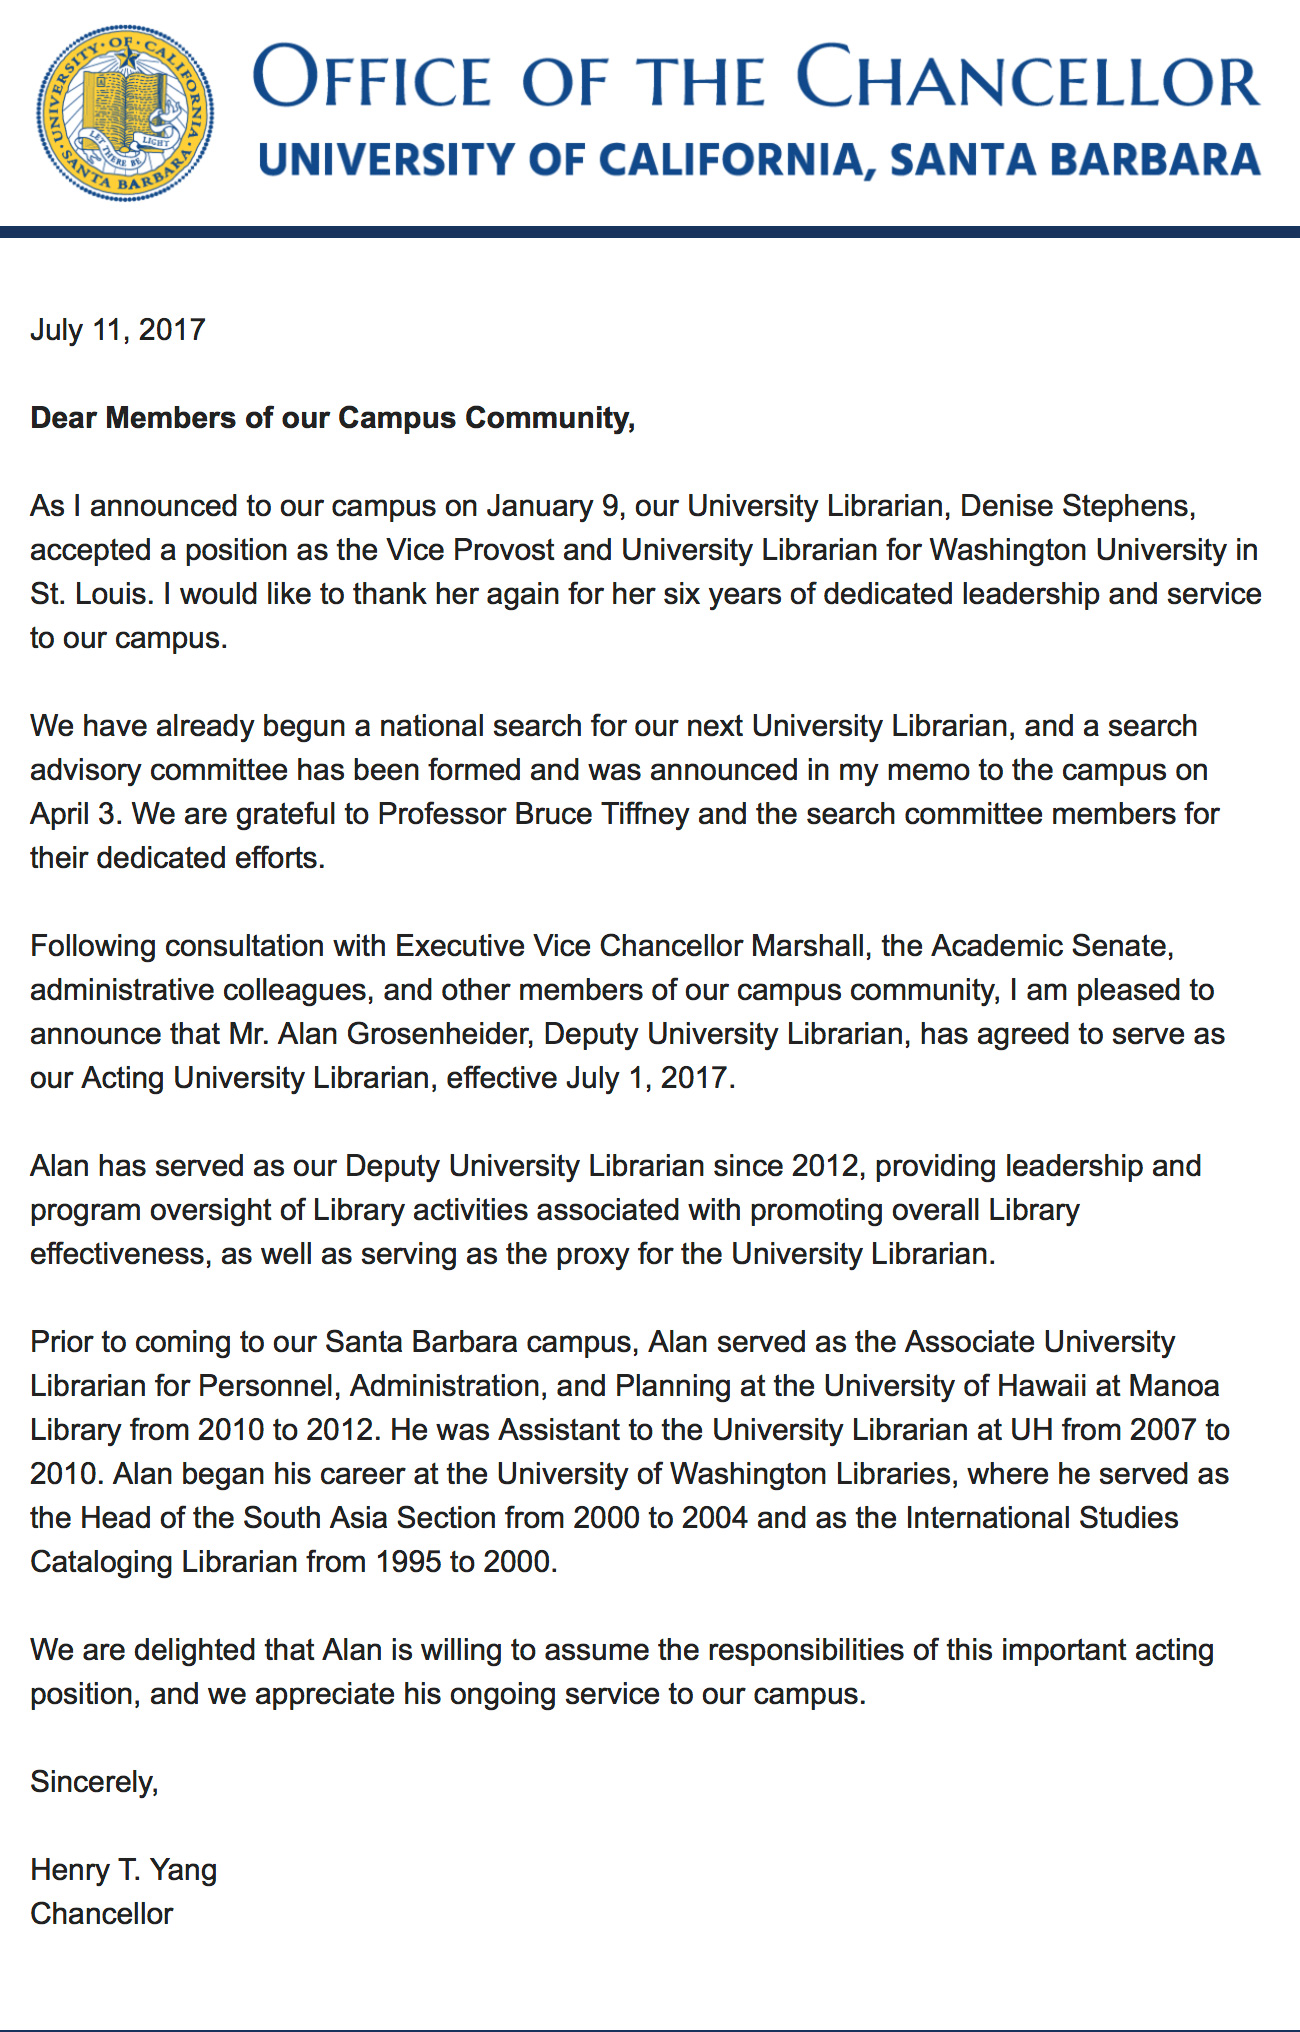 Image of Chancellor Henry T. Yang's letter to campus regarding the appointment of Alan Grosenheider as Acting University Librarian.